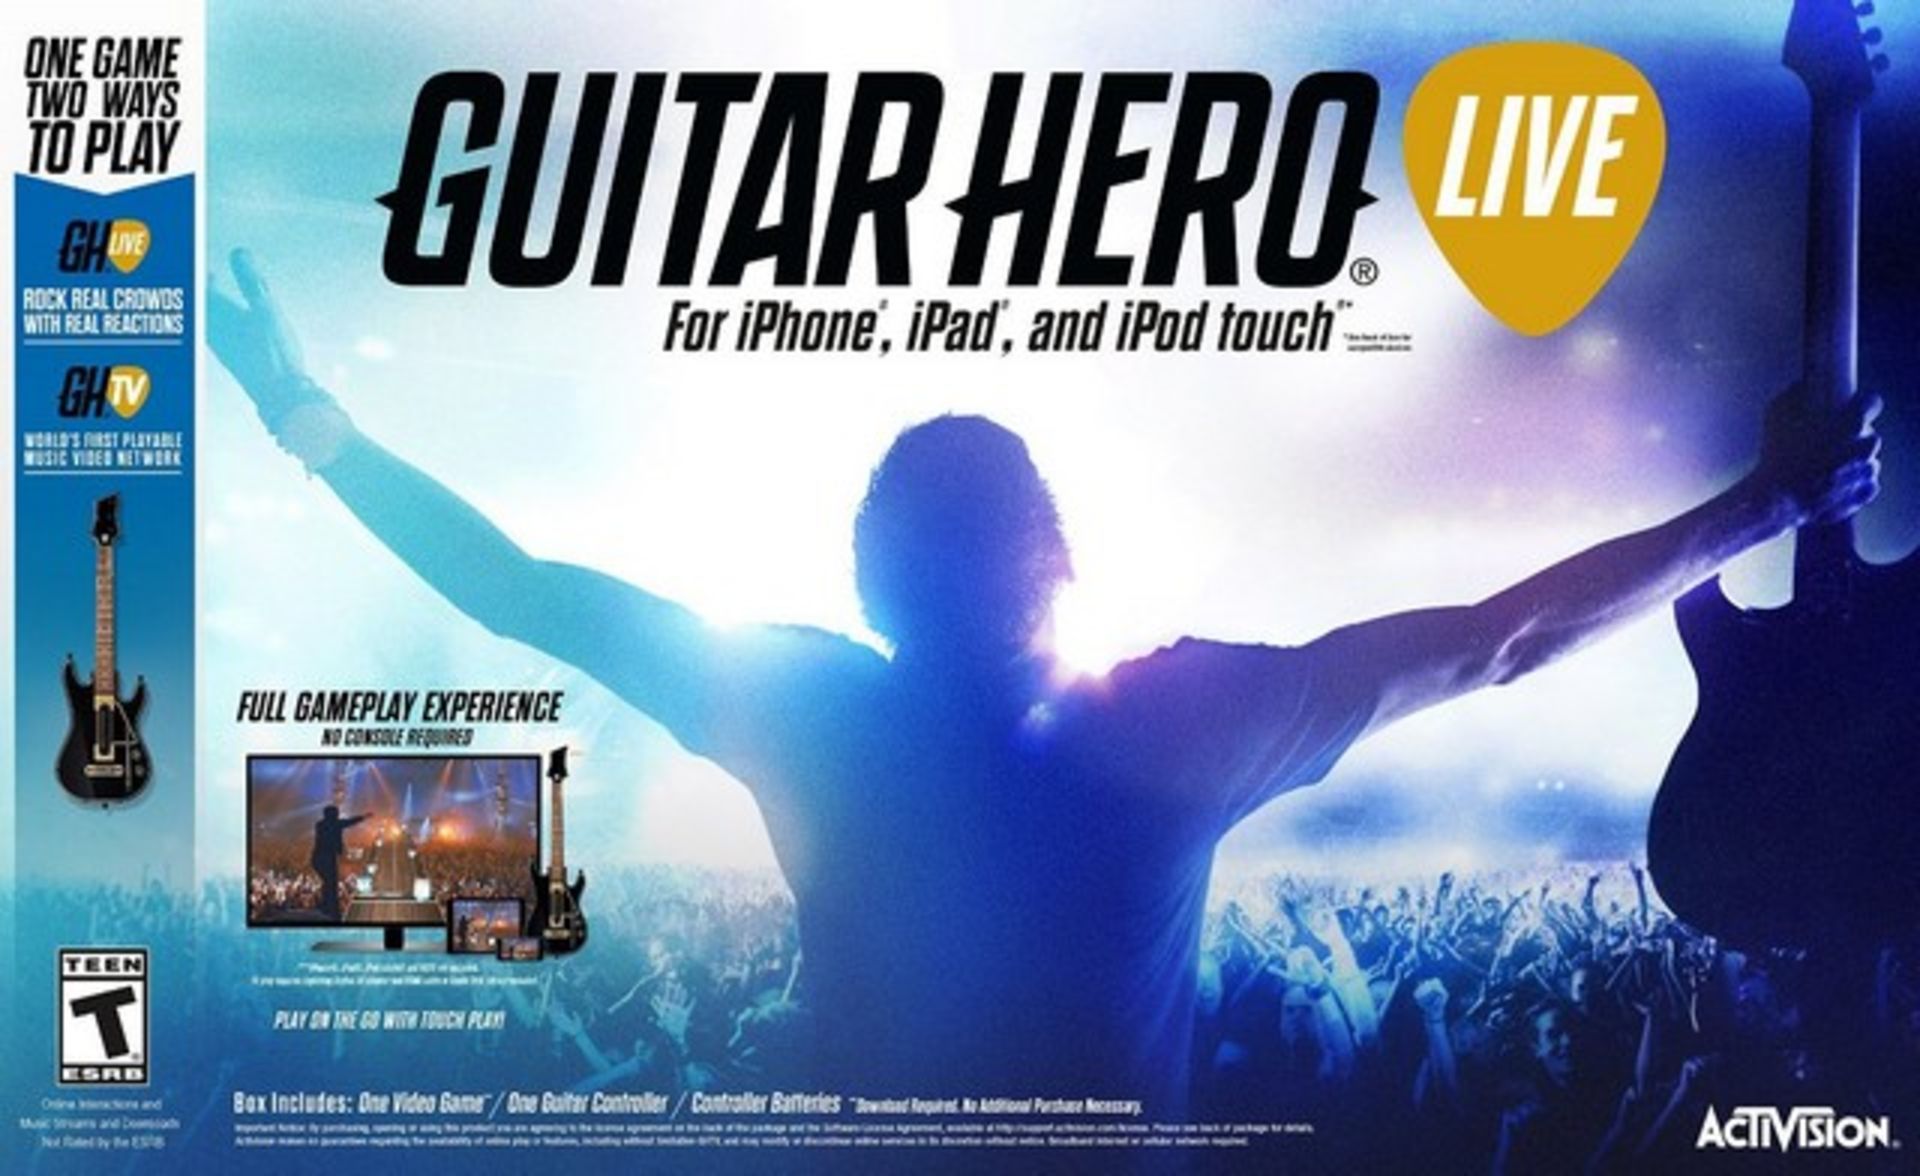 V Brand New Guitar Hero Live For iPhone iPad And iPod Touch Includes Video Game/Guitar Controller/ - Image 2 of 4